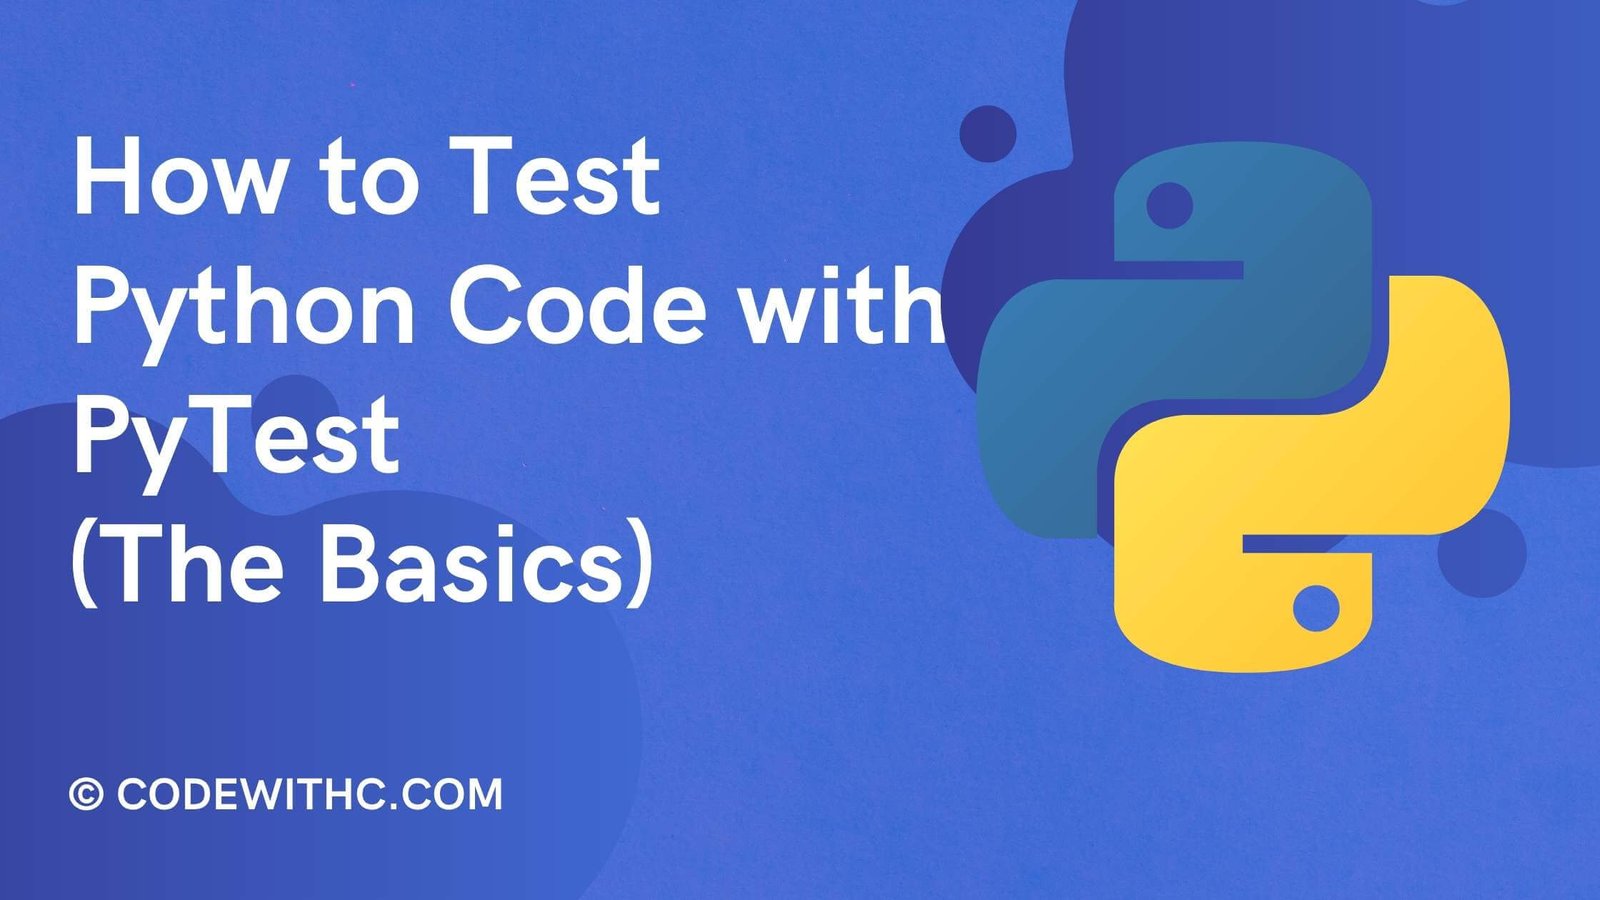 How to Test Python Code with PyTest (1)